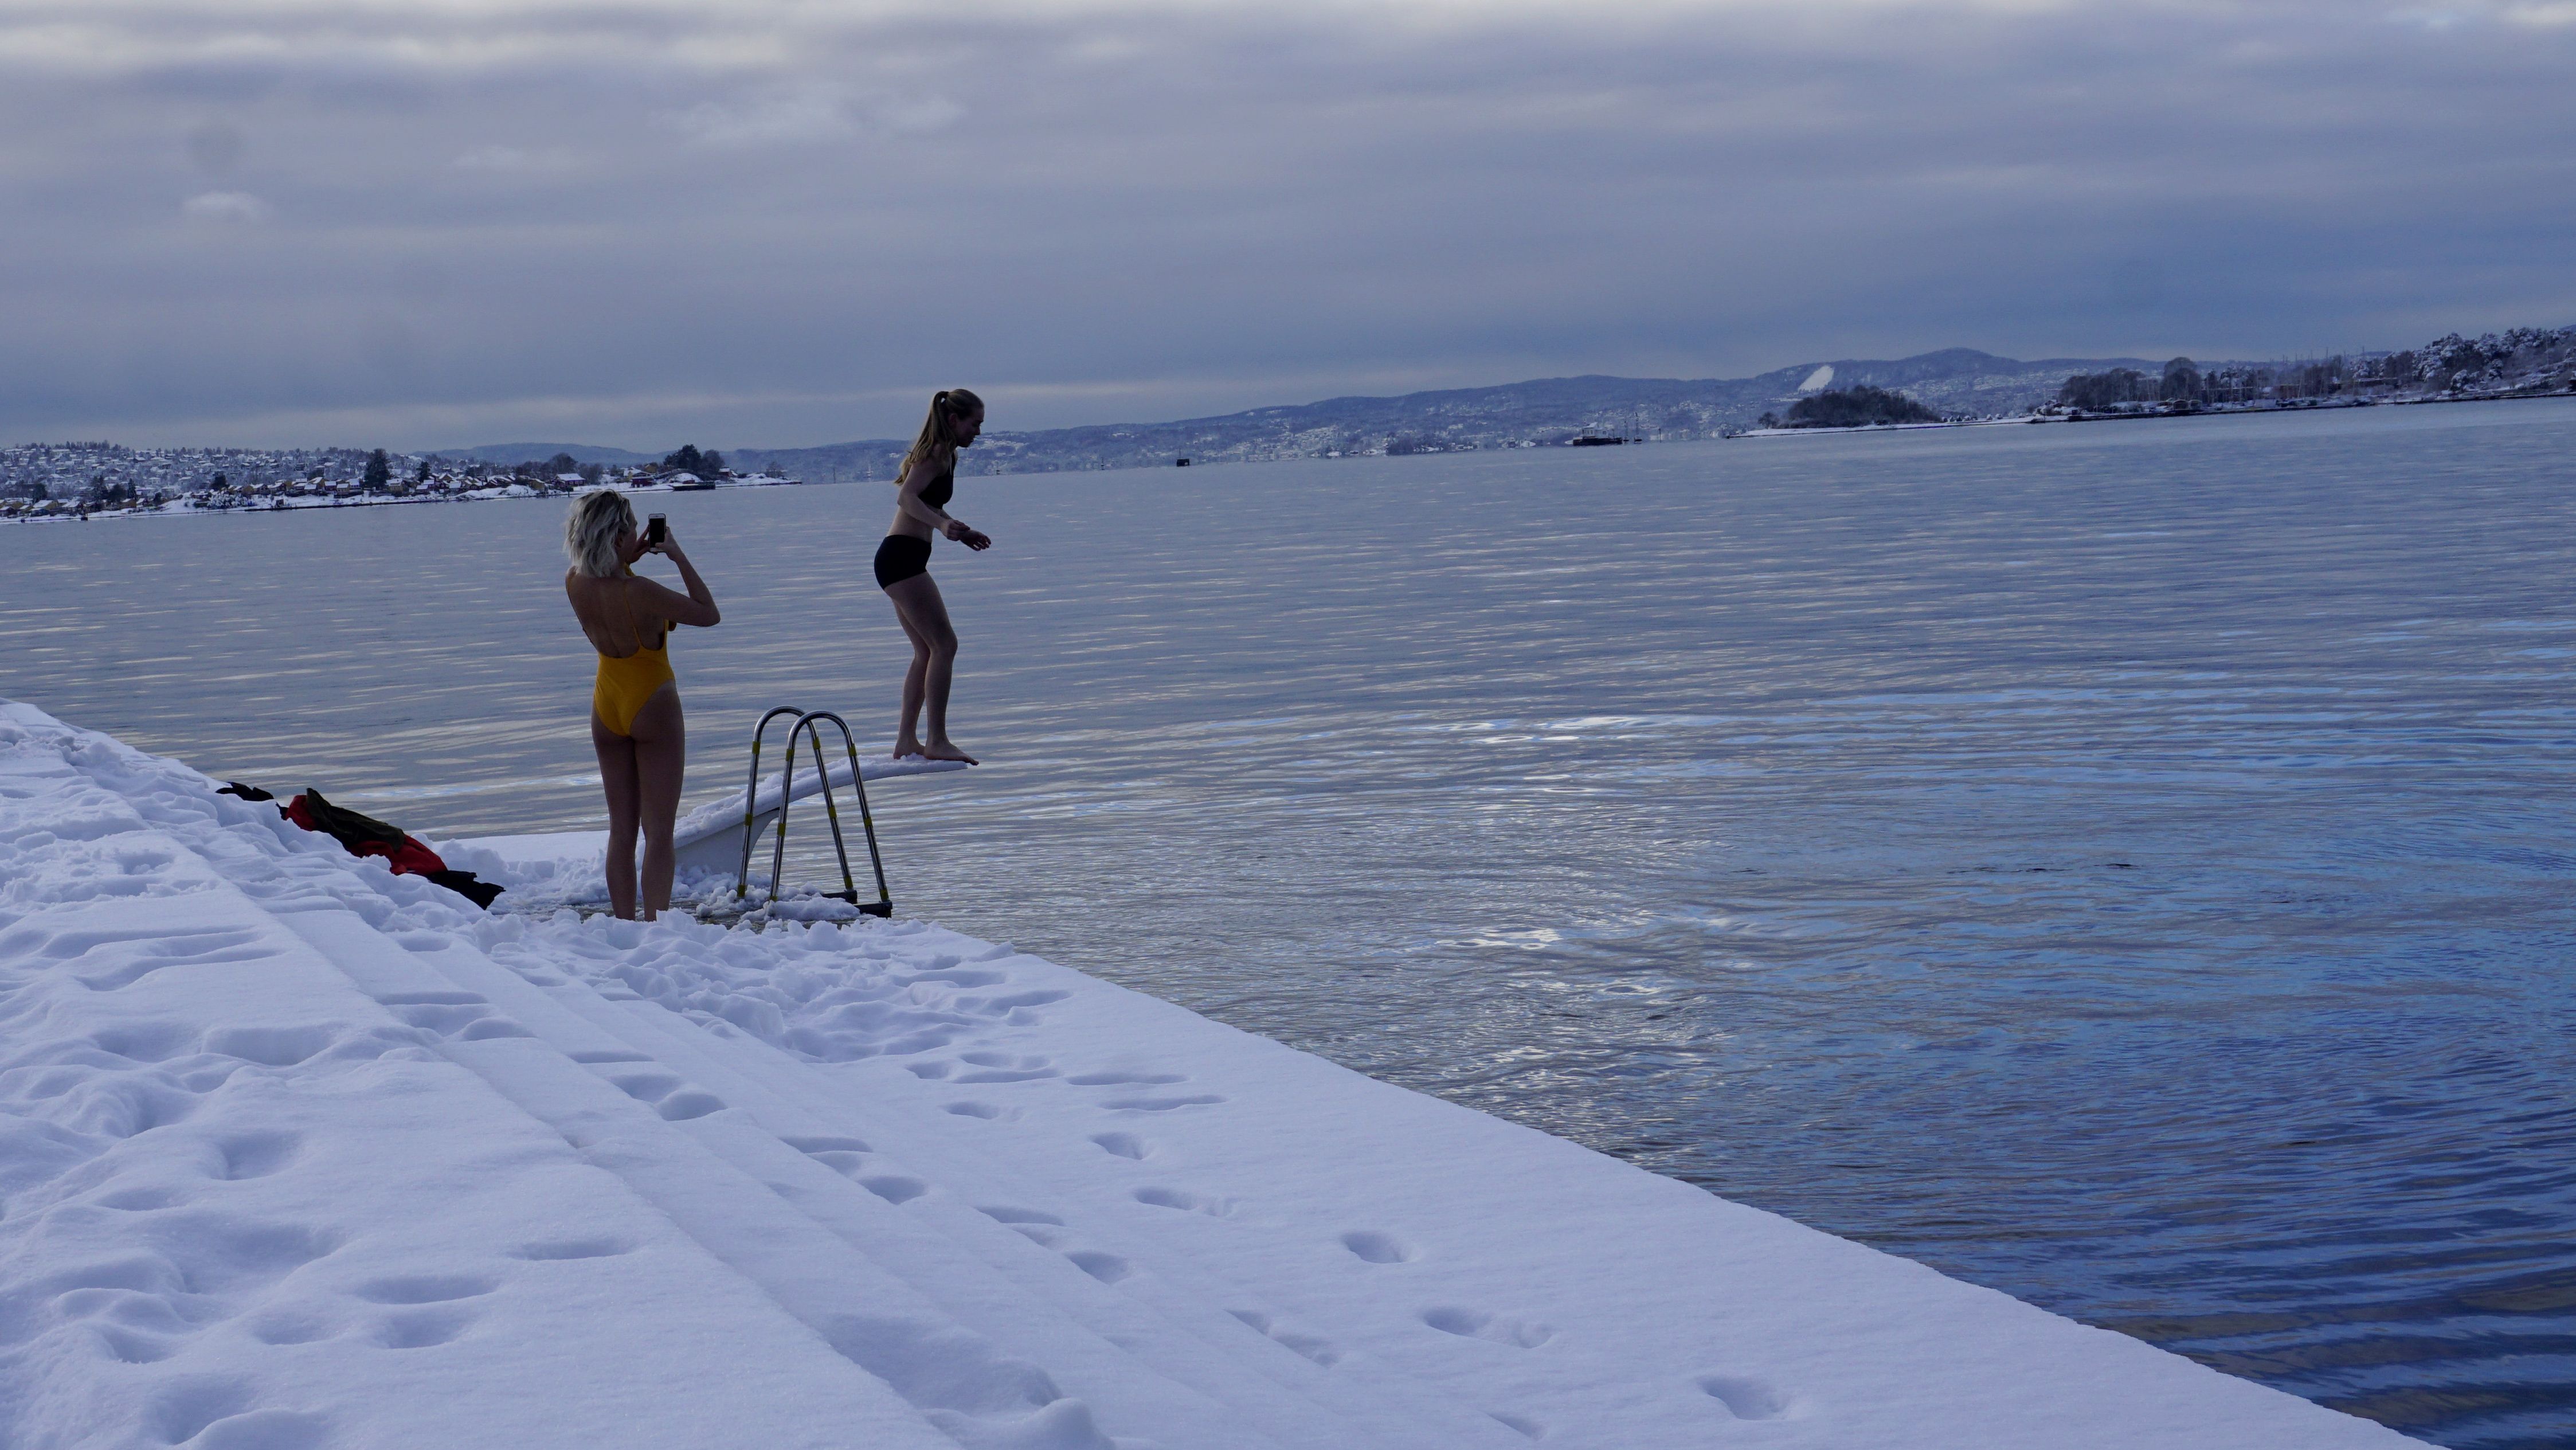 A youth prepares to jump into cold water at the Oslo harbor.